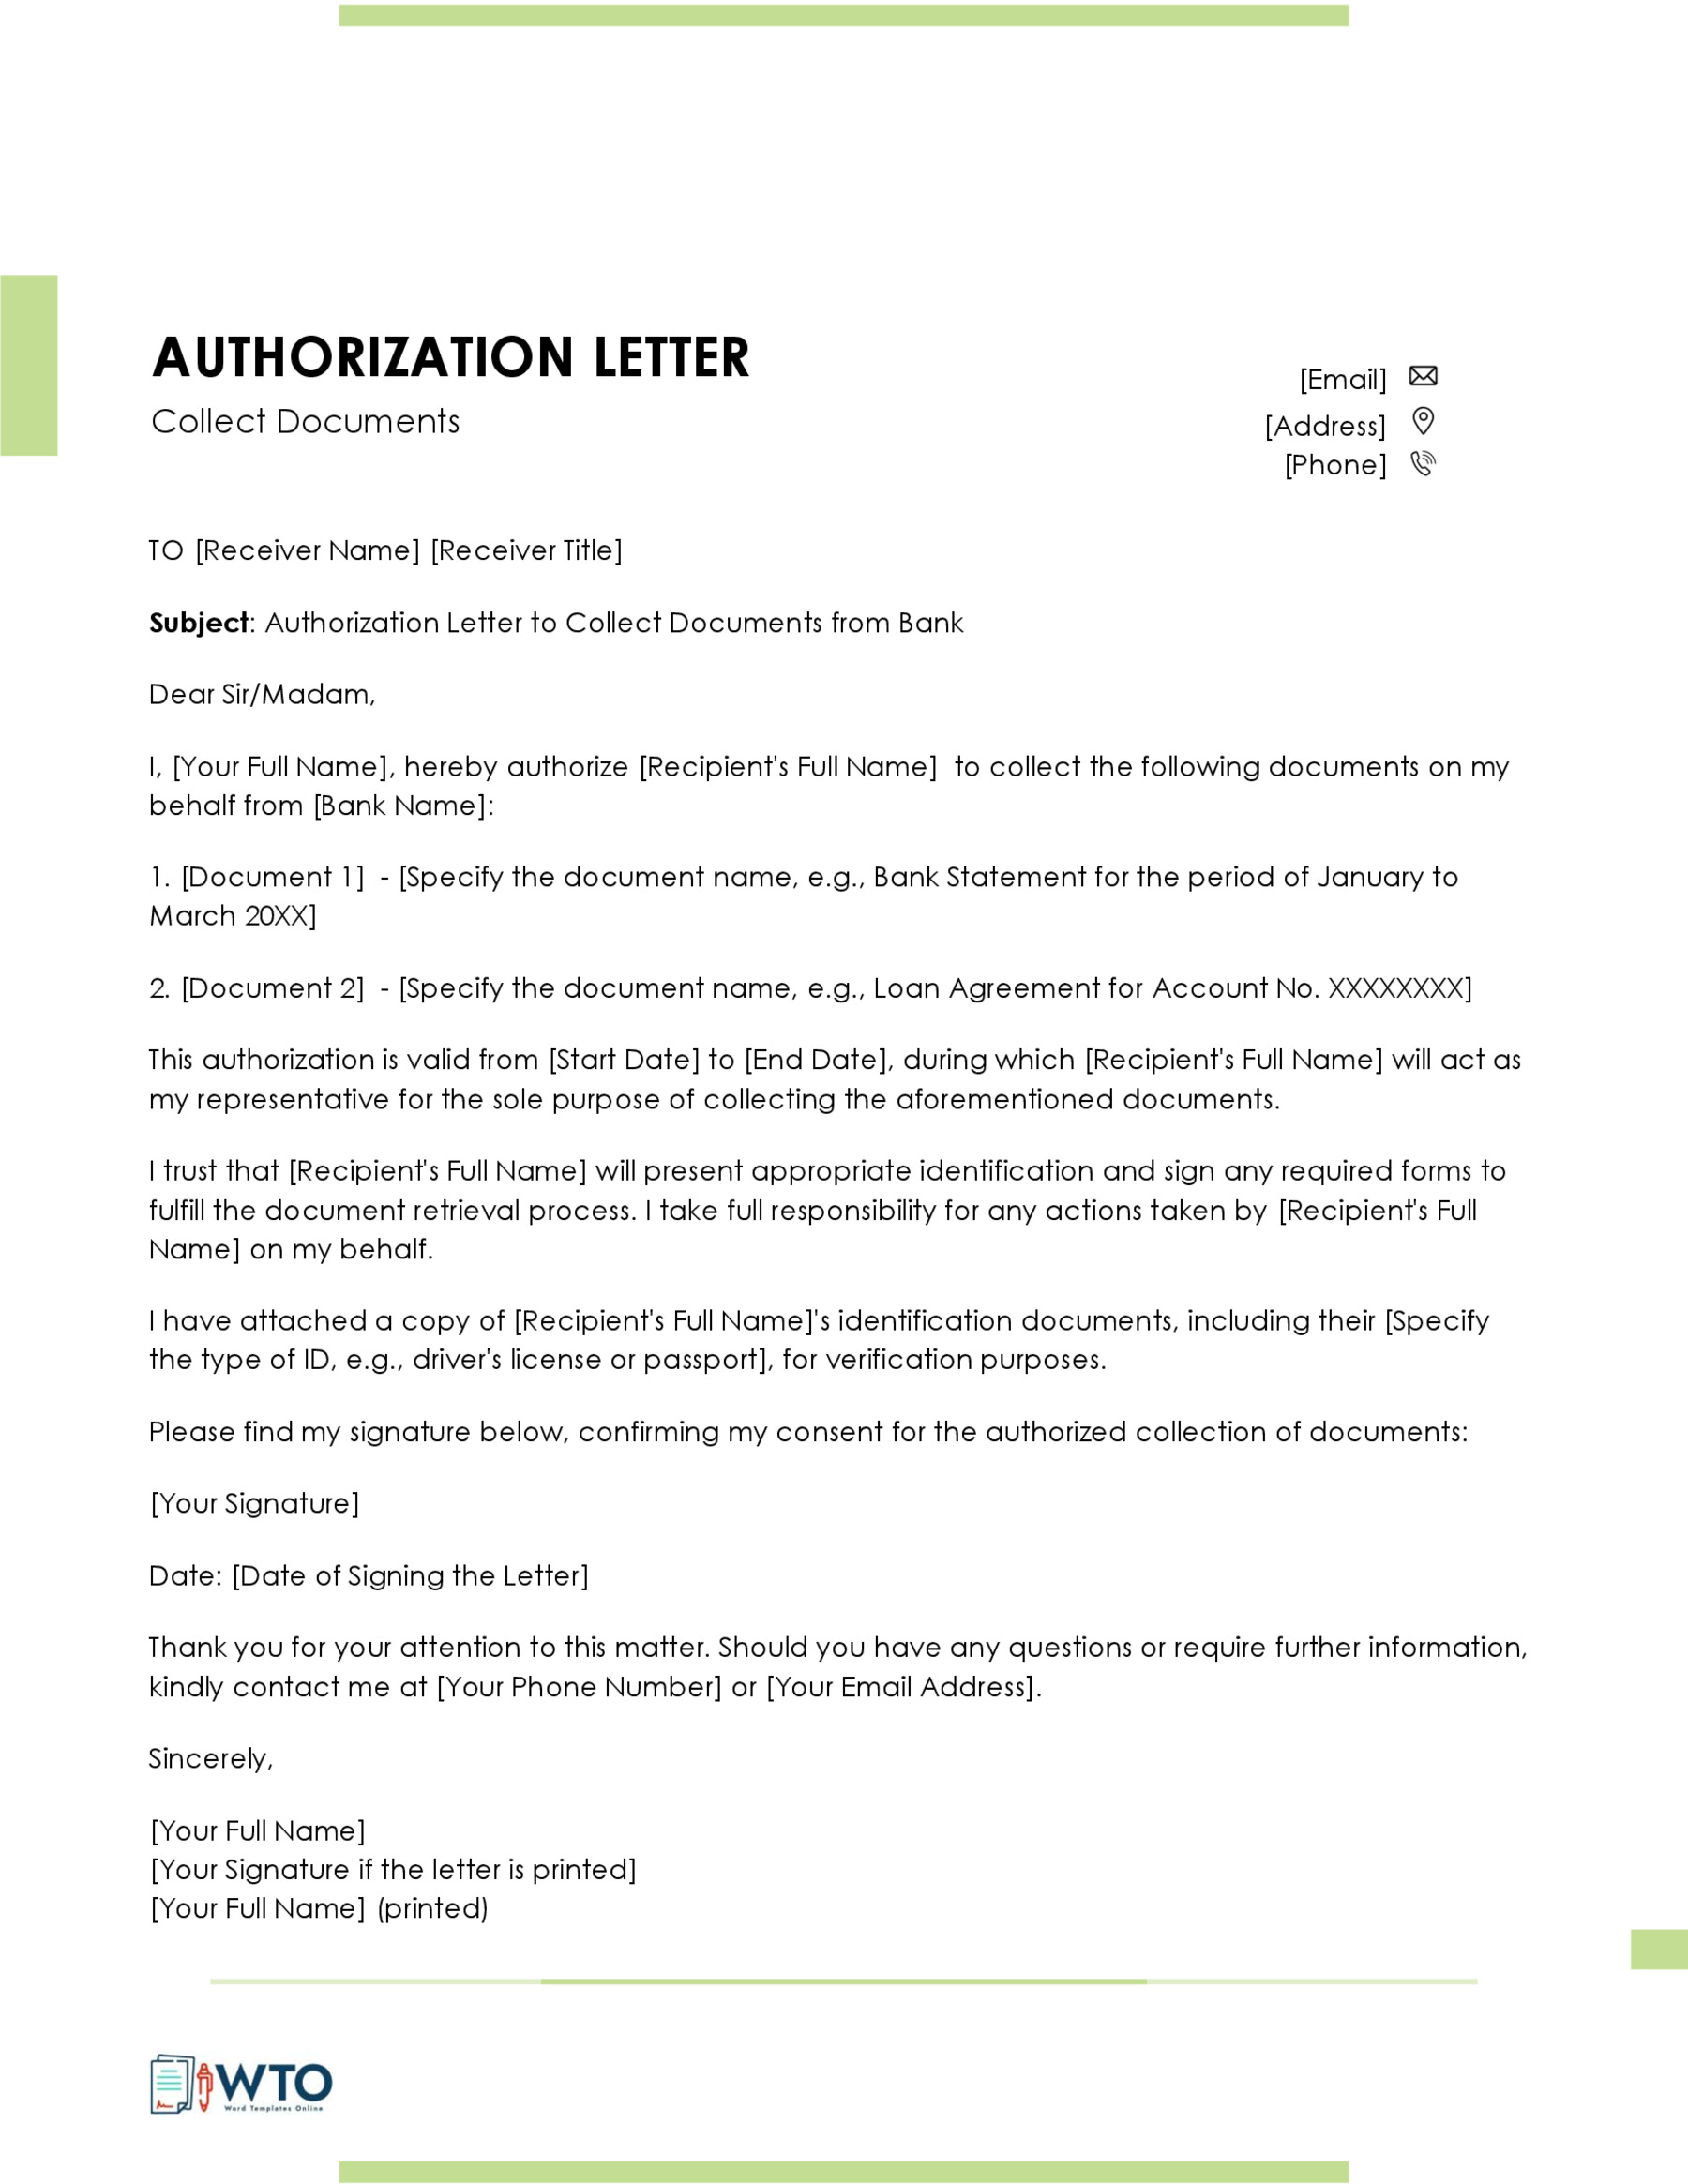 Printable Authorization Letter to Pick Up Documents FREE DOWNLOAD